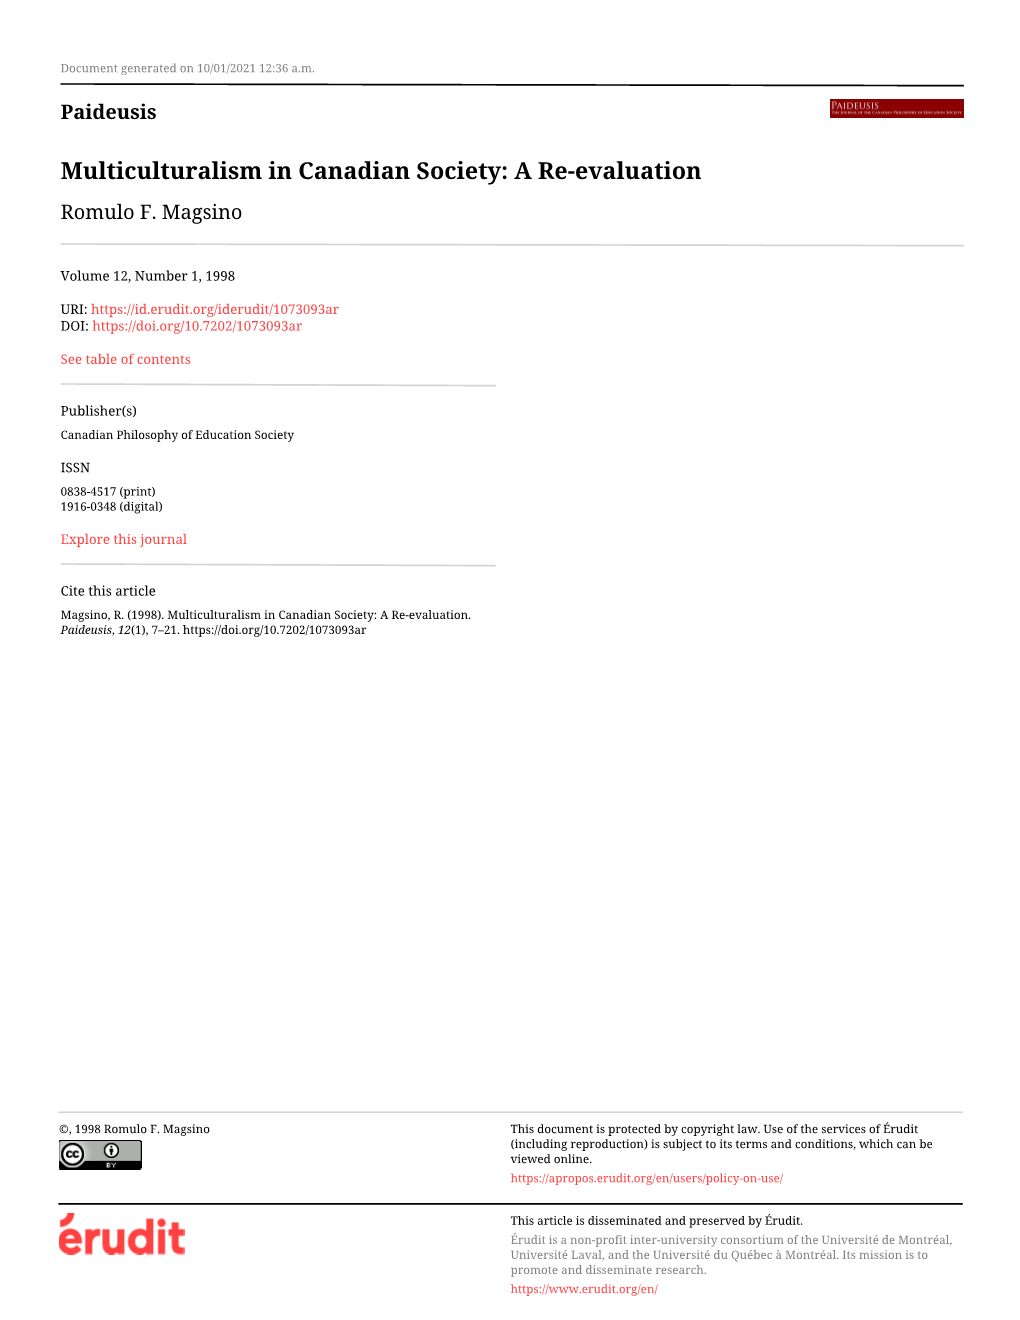 Multiculturalism in Canadian Society: a Re-Evaluation Romulo F